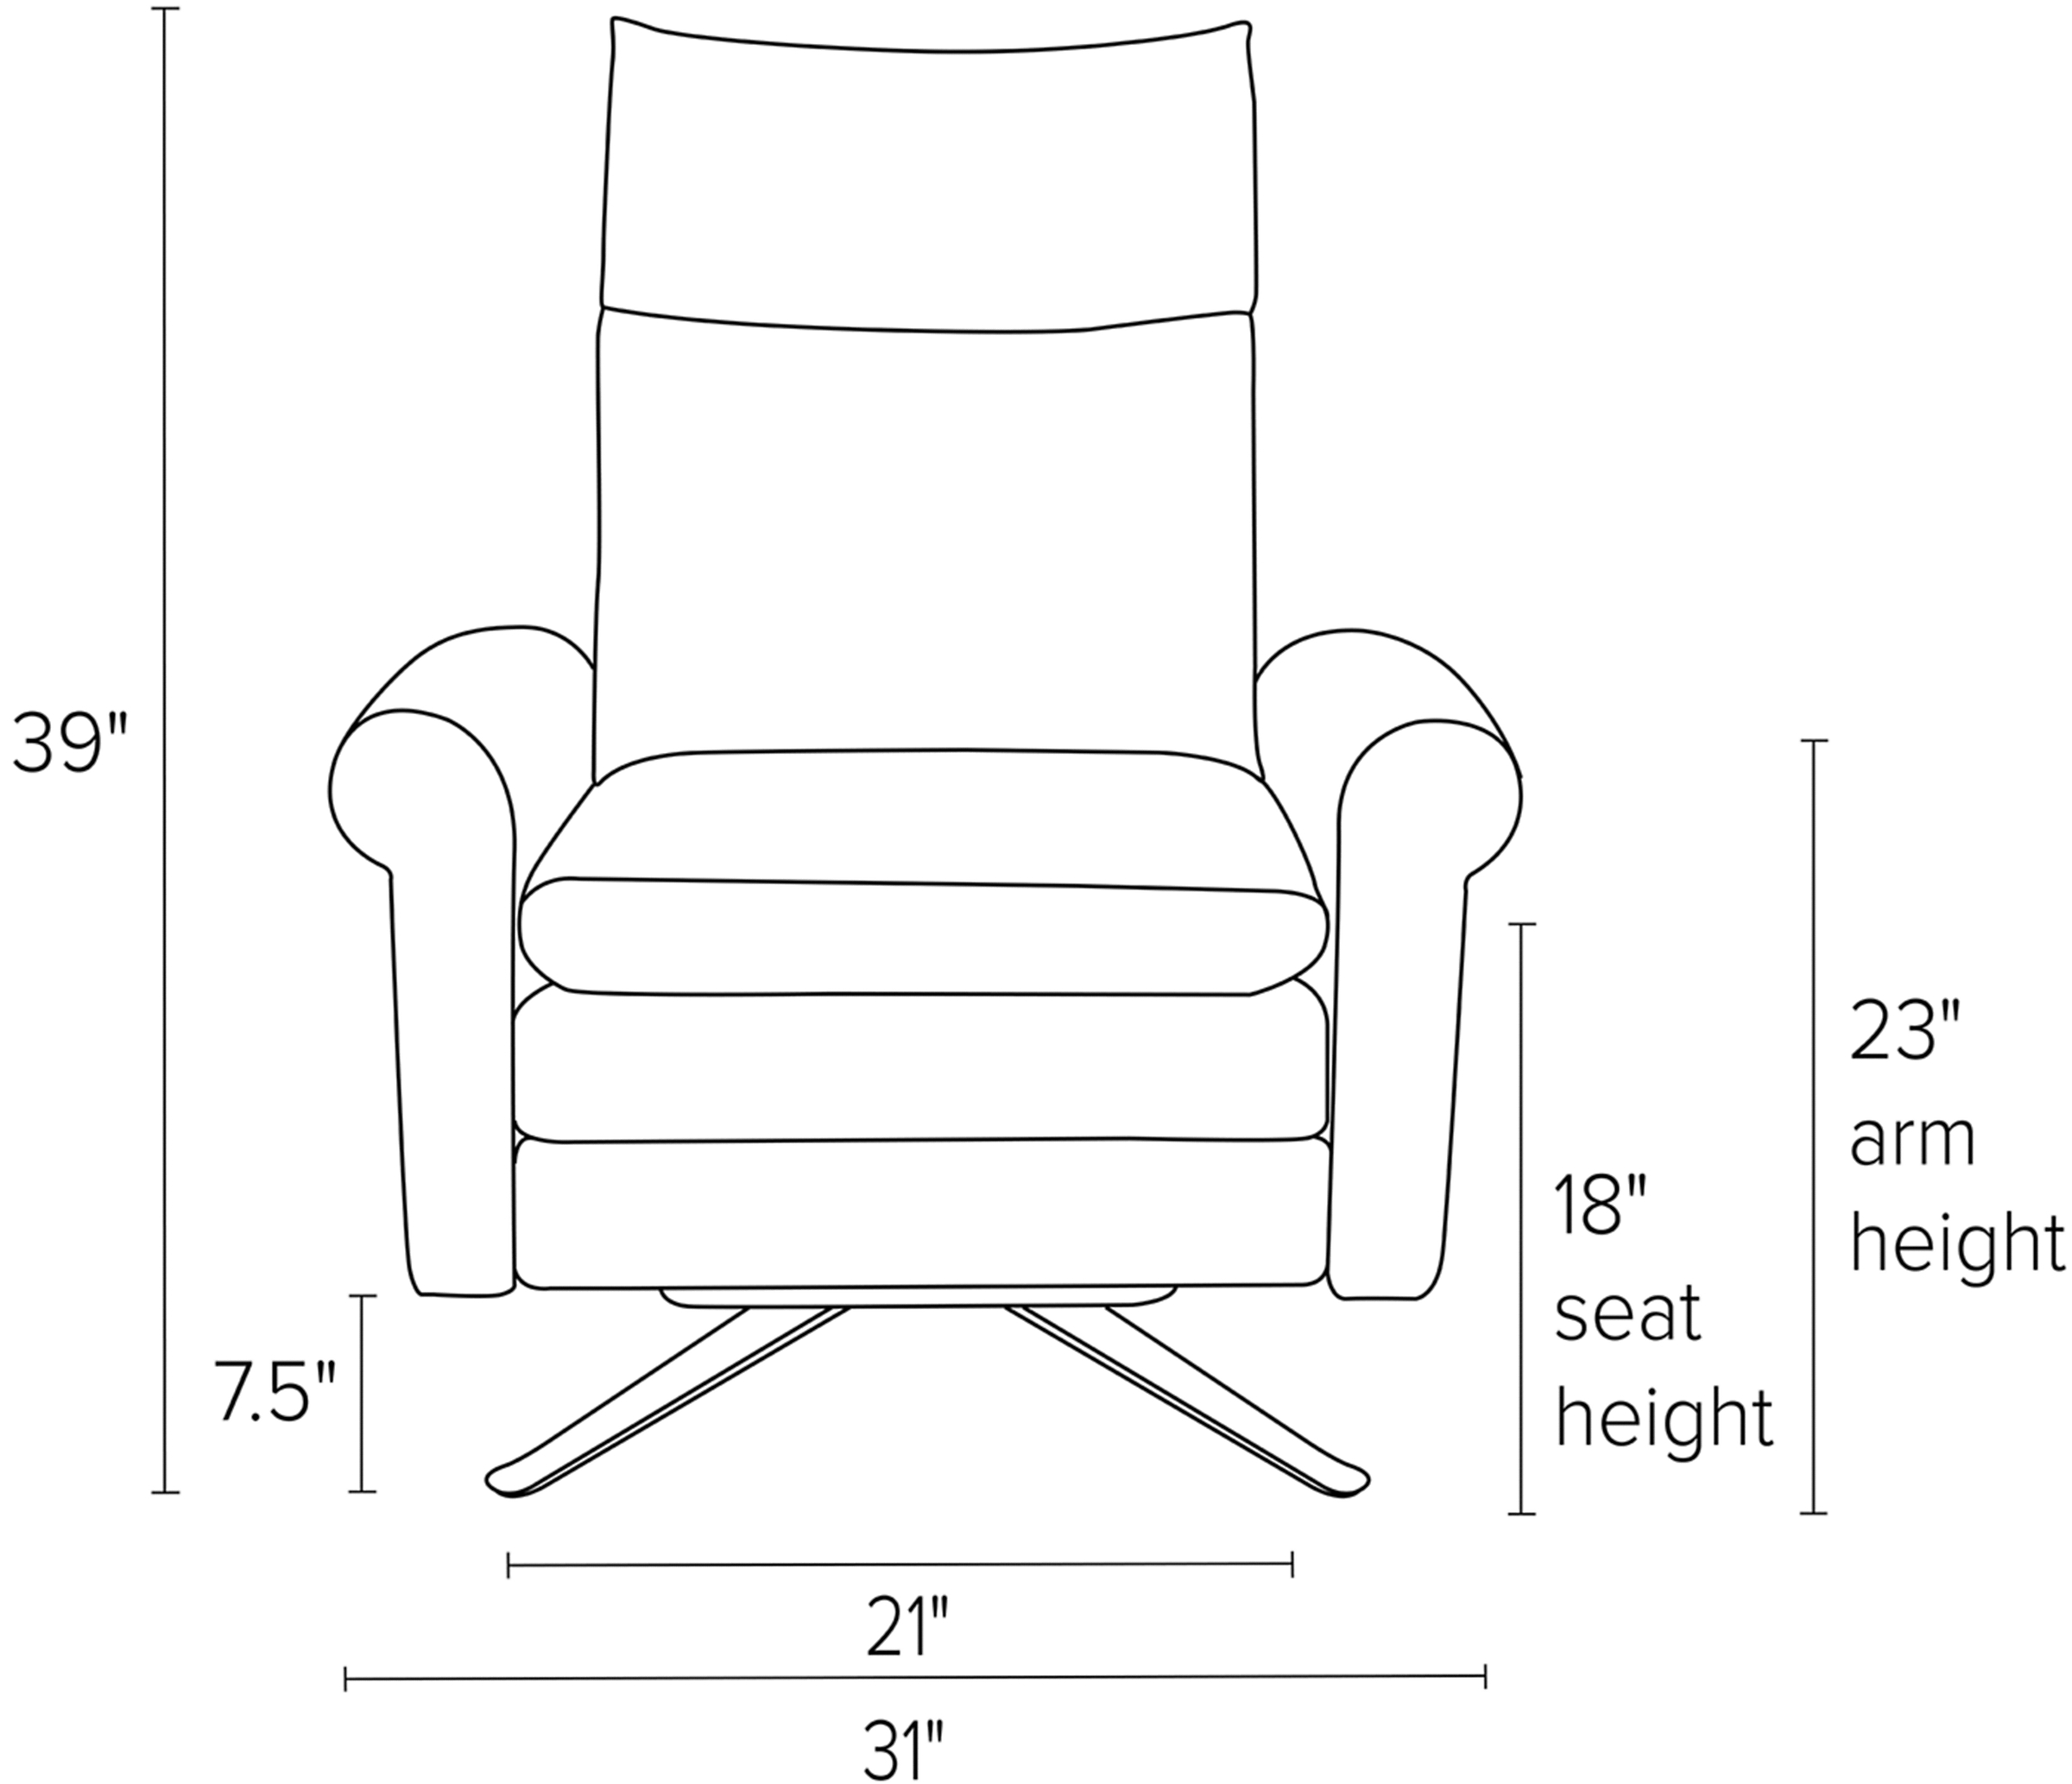 Front view dimension illustration of Isaac recliner with rolled arms.